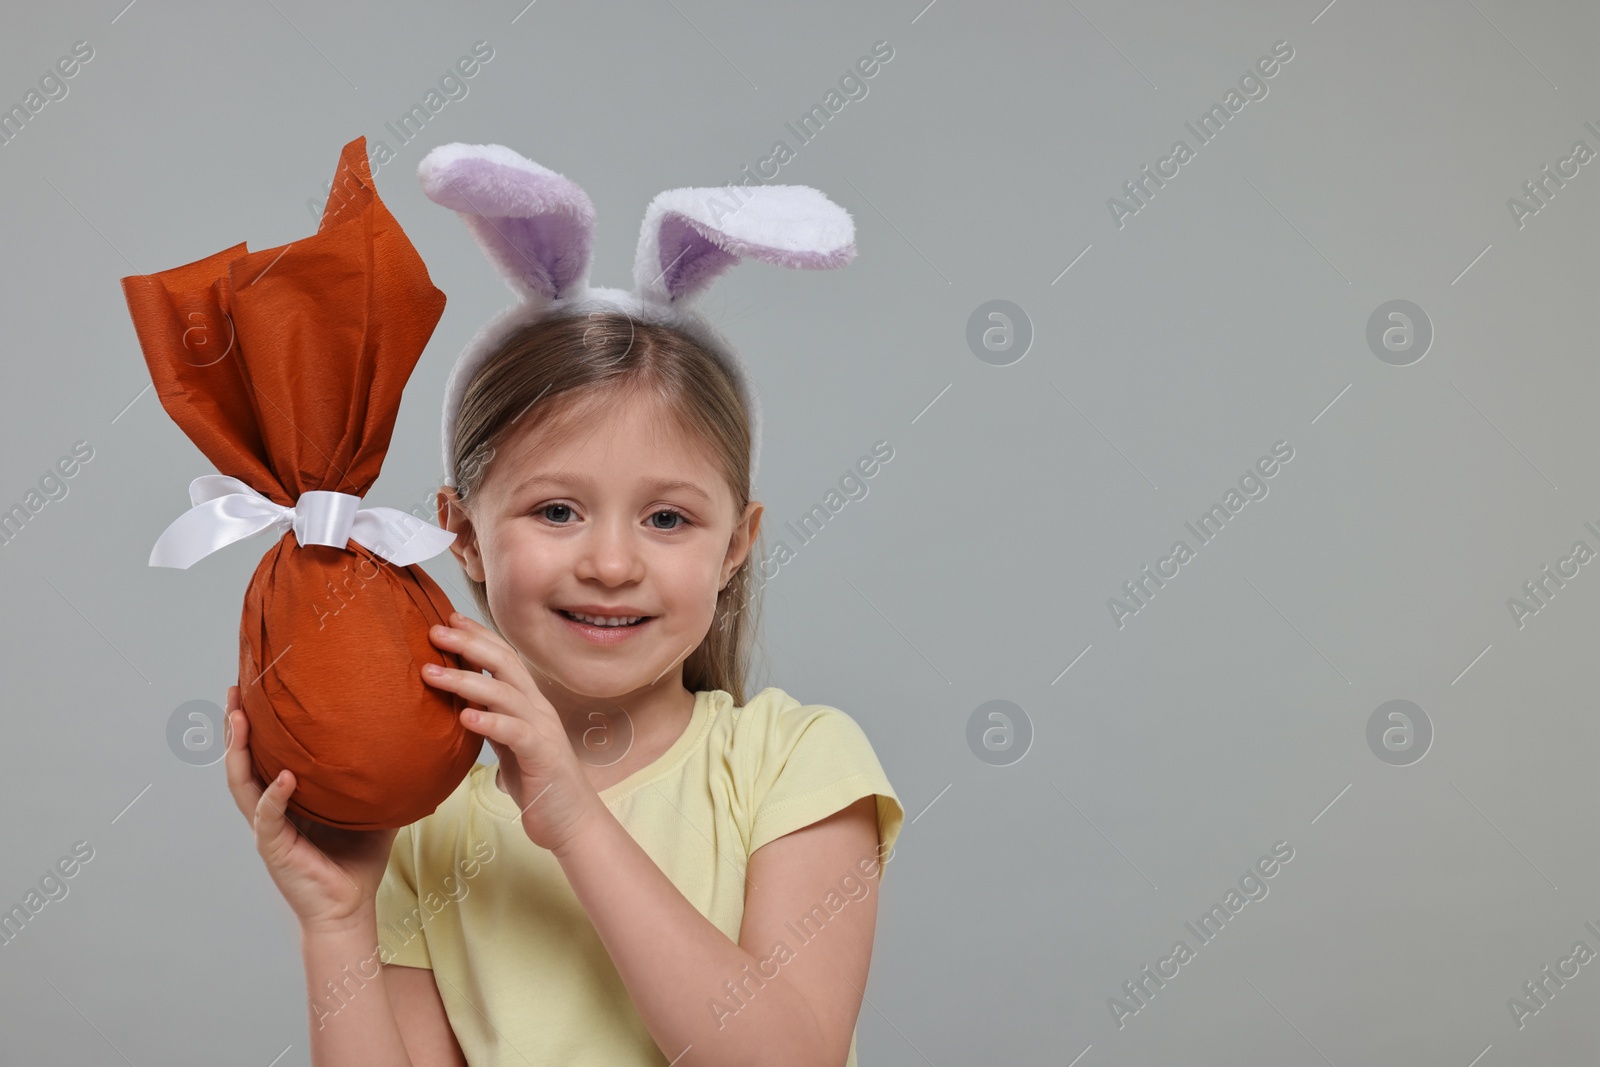 Photo of Easter celebration. Cute girl with bunny ears holding wrapped gift on gray background, space for text